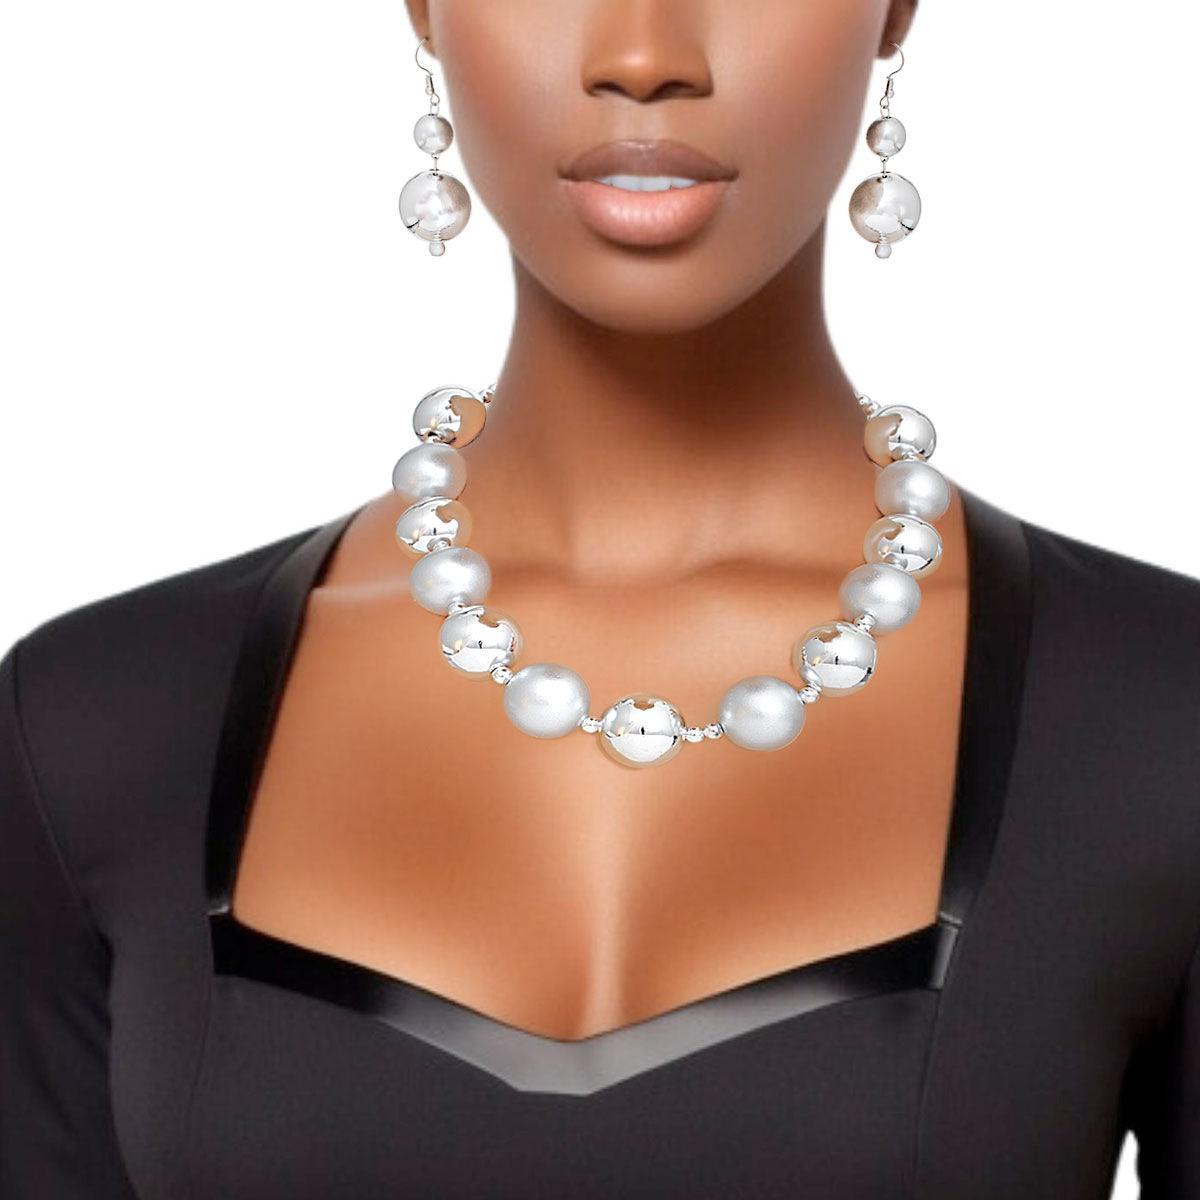 Bauble Pearl Gray Silver Necklace Earrings Set - Level Up Your Fashion Jewelry Collection